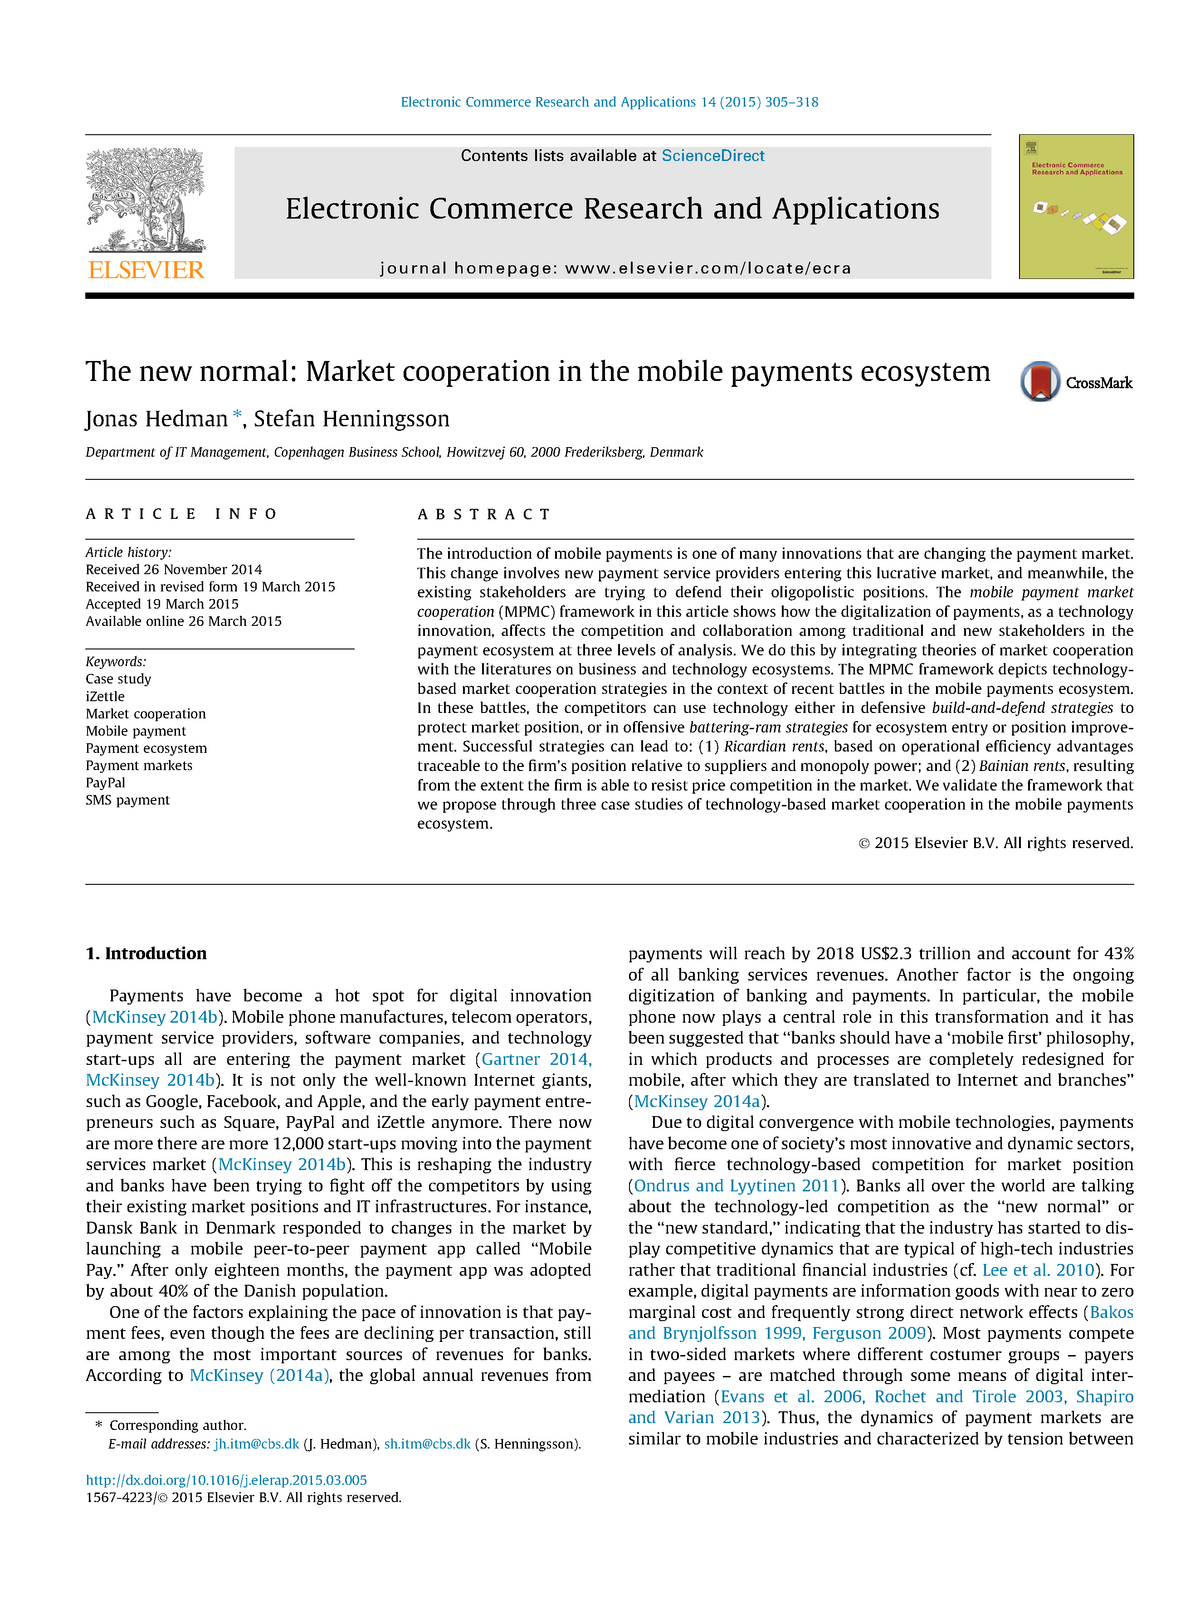 research paper on mobile payment apps